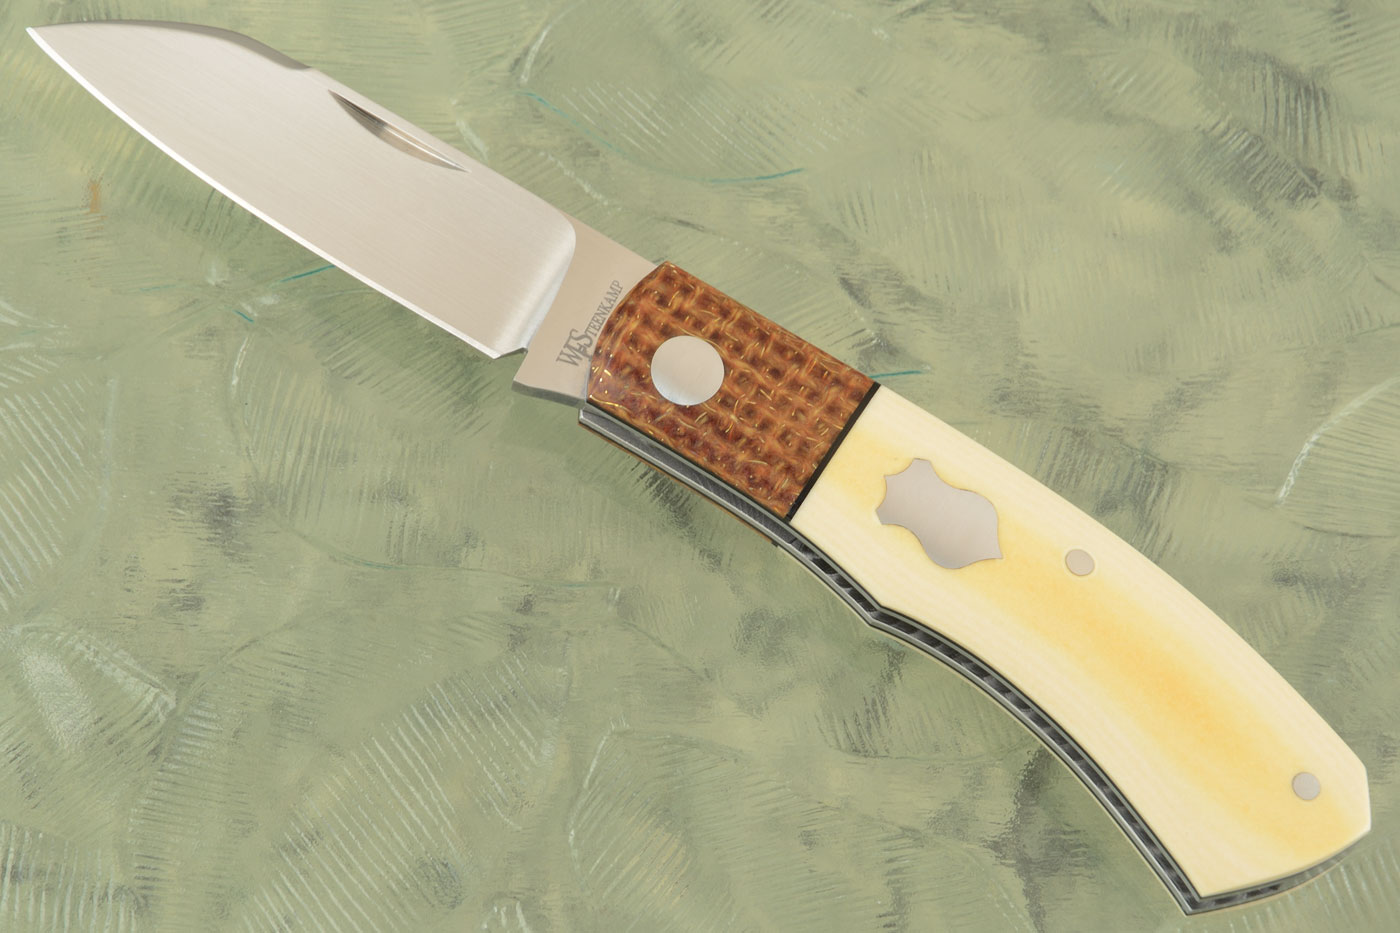 Dino Slipjoint with Antique Westinghouse Micarta and Thunderstorm Kevlar